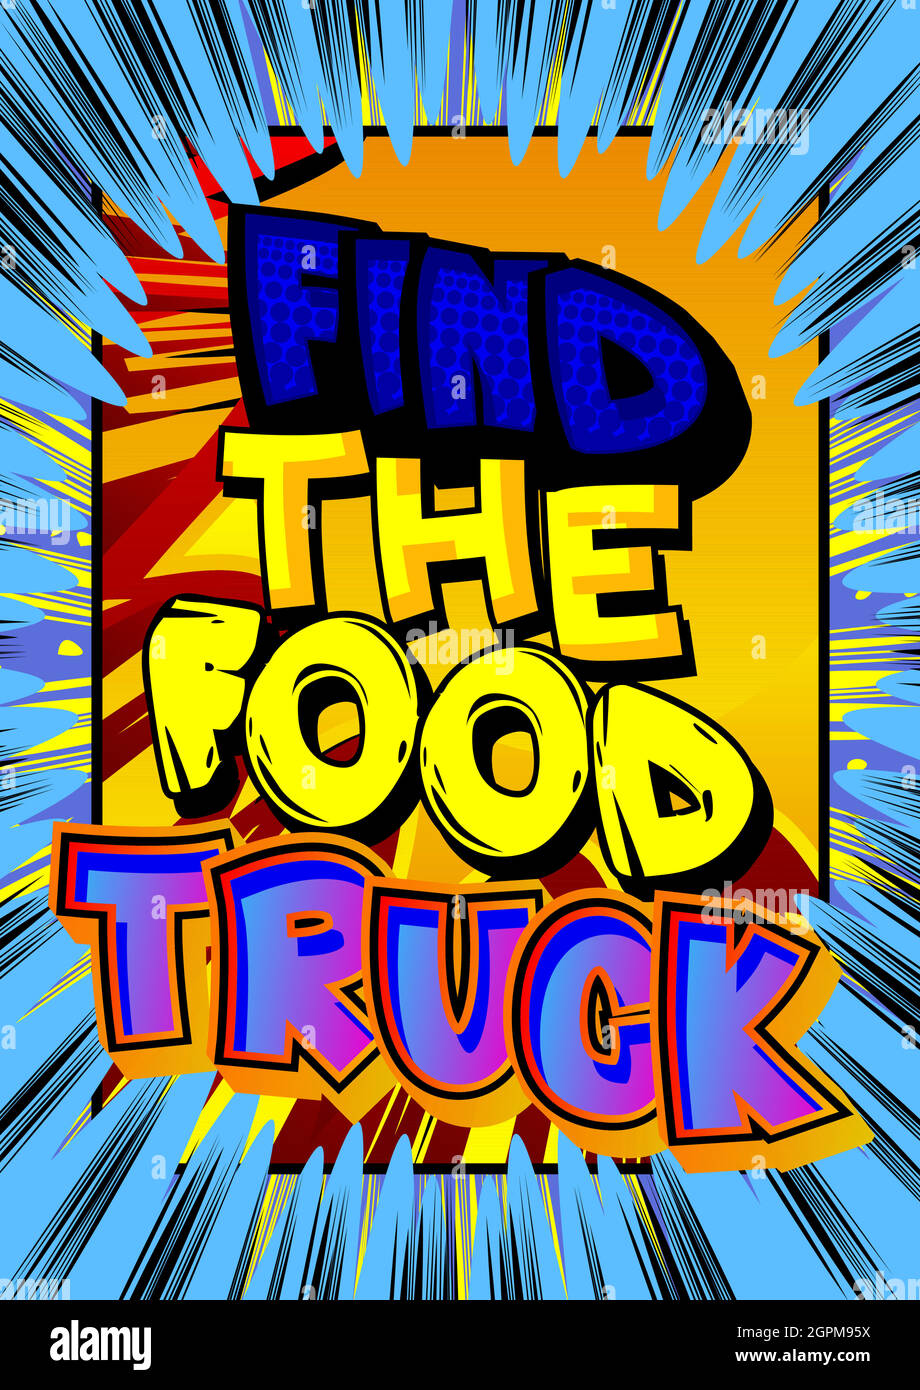 Find the Food Truck - Comic book style text. Stock Vector